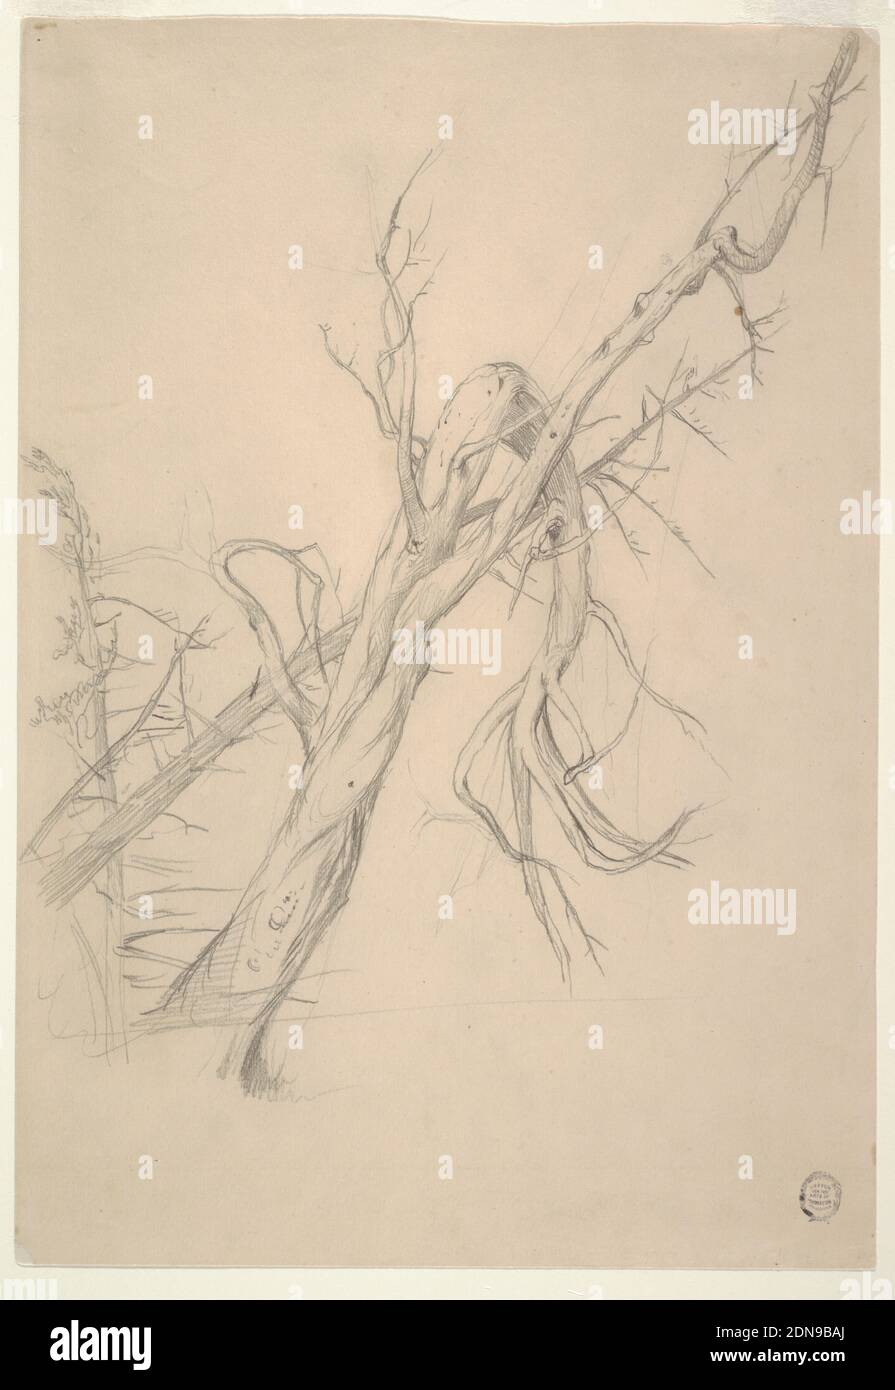 Gnarled Dead Tree, Frederic Edwin Church, American, 1826–1900, Graphite on buff paper, Recto: A gnarled tree, and horizontally at top left two caricature heads shown in profile and de face, respectively., Verso: A gnarled dead tree standing before an oblique and an upright tree., Jamaica, 1850s, nature studies, Drawing Stock Photo